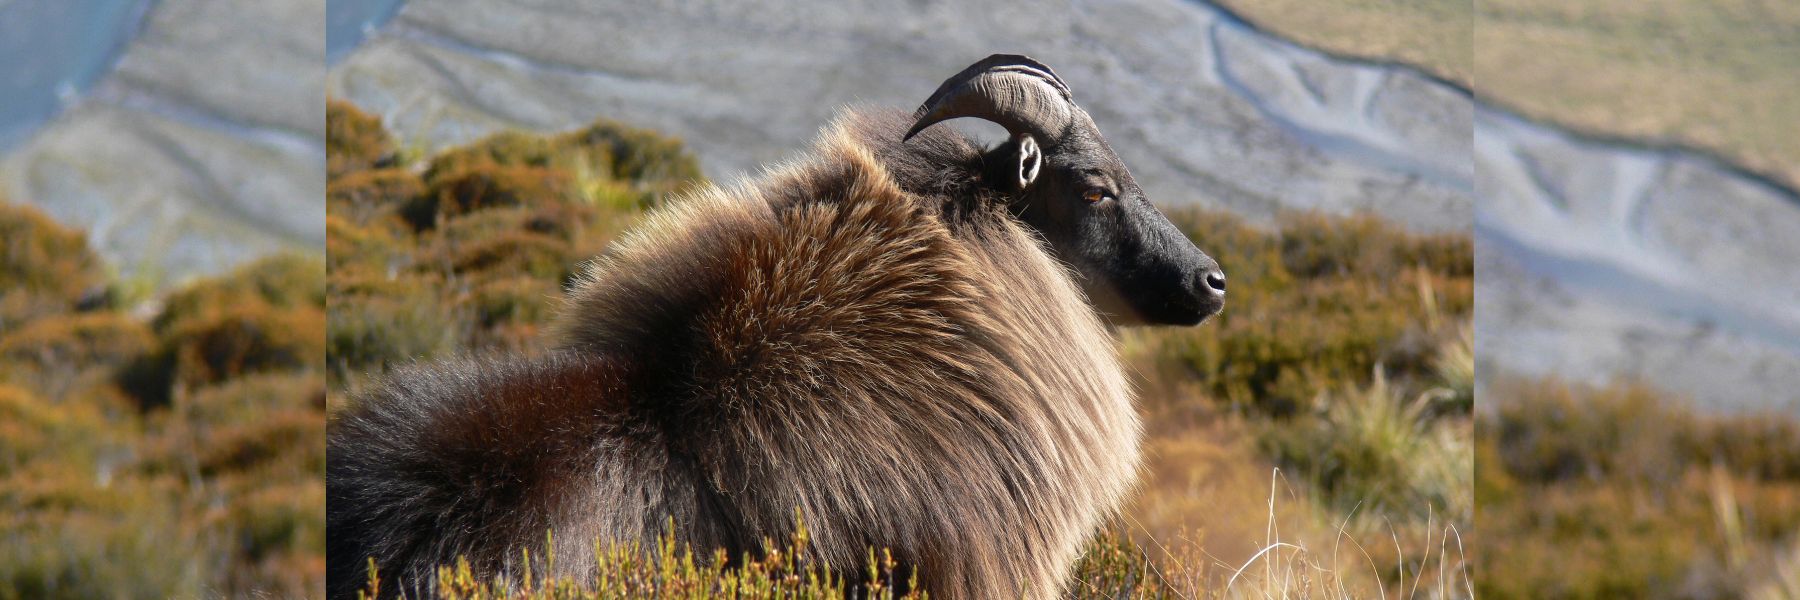 Tahr A Complex Issue